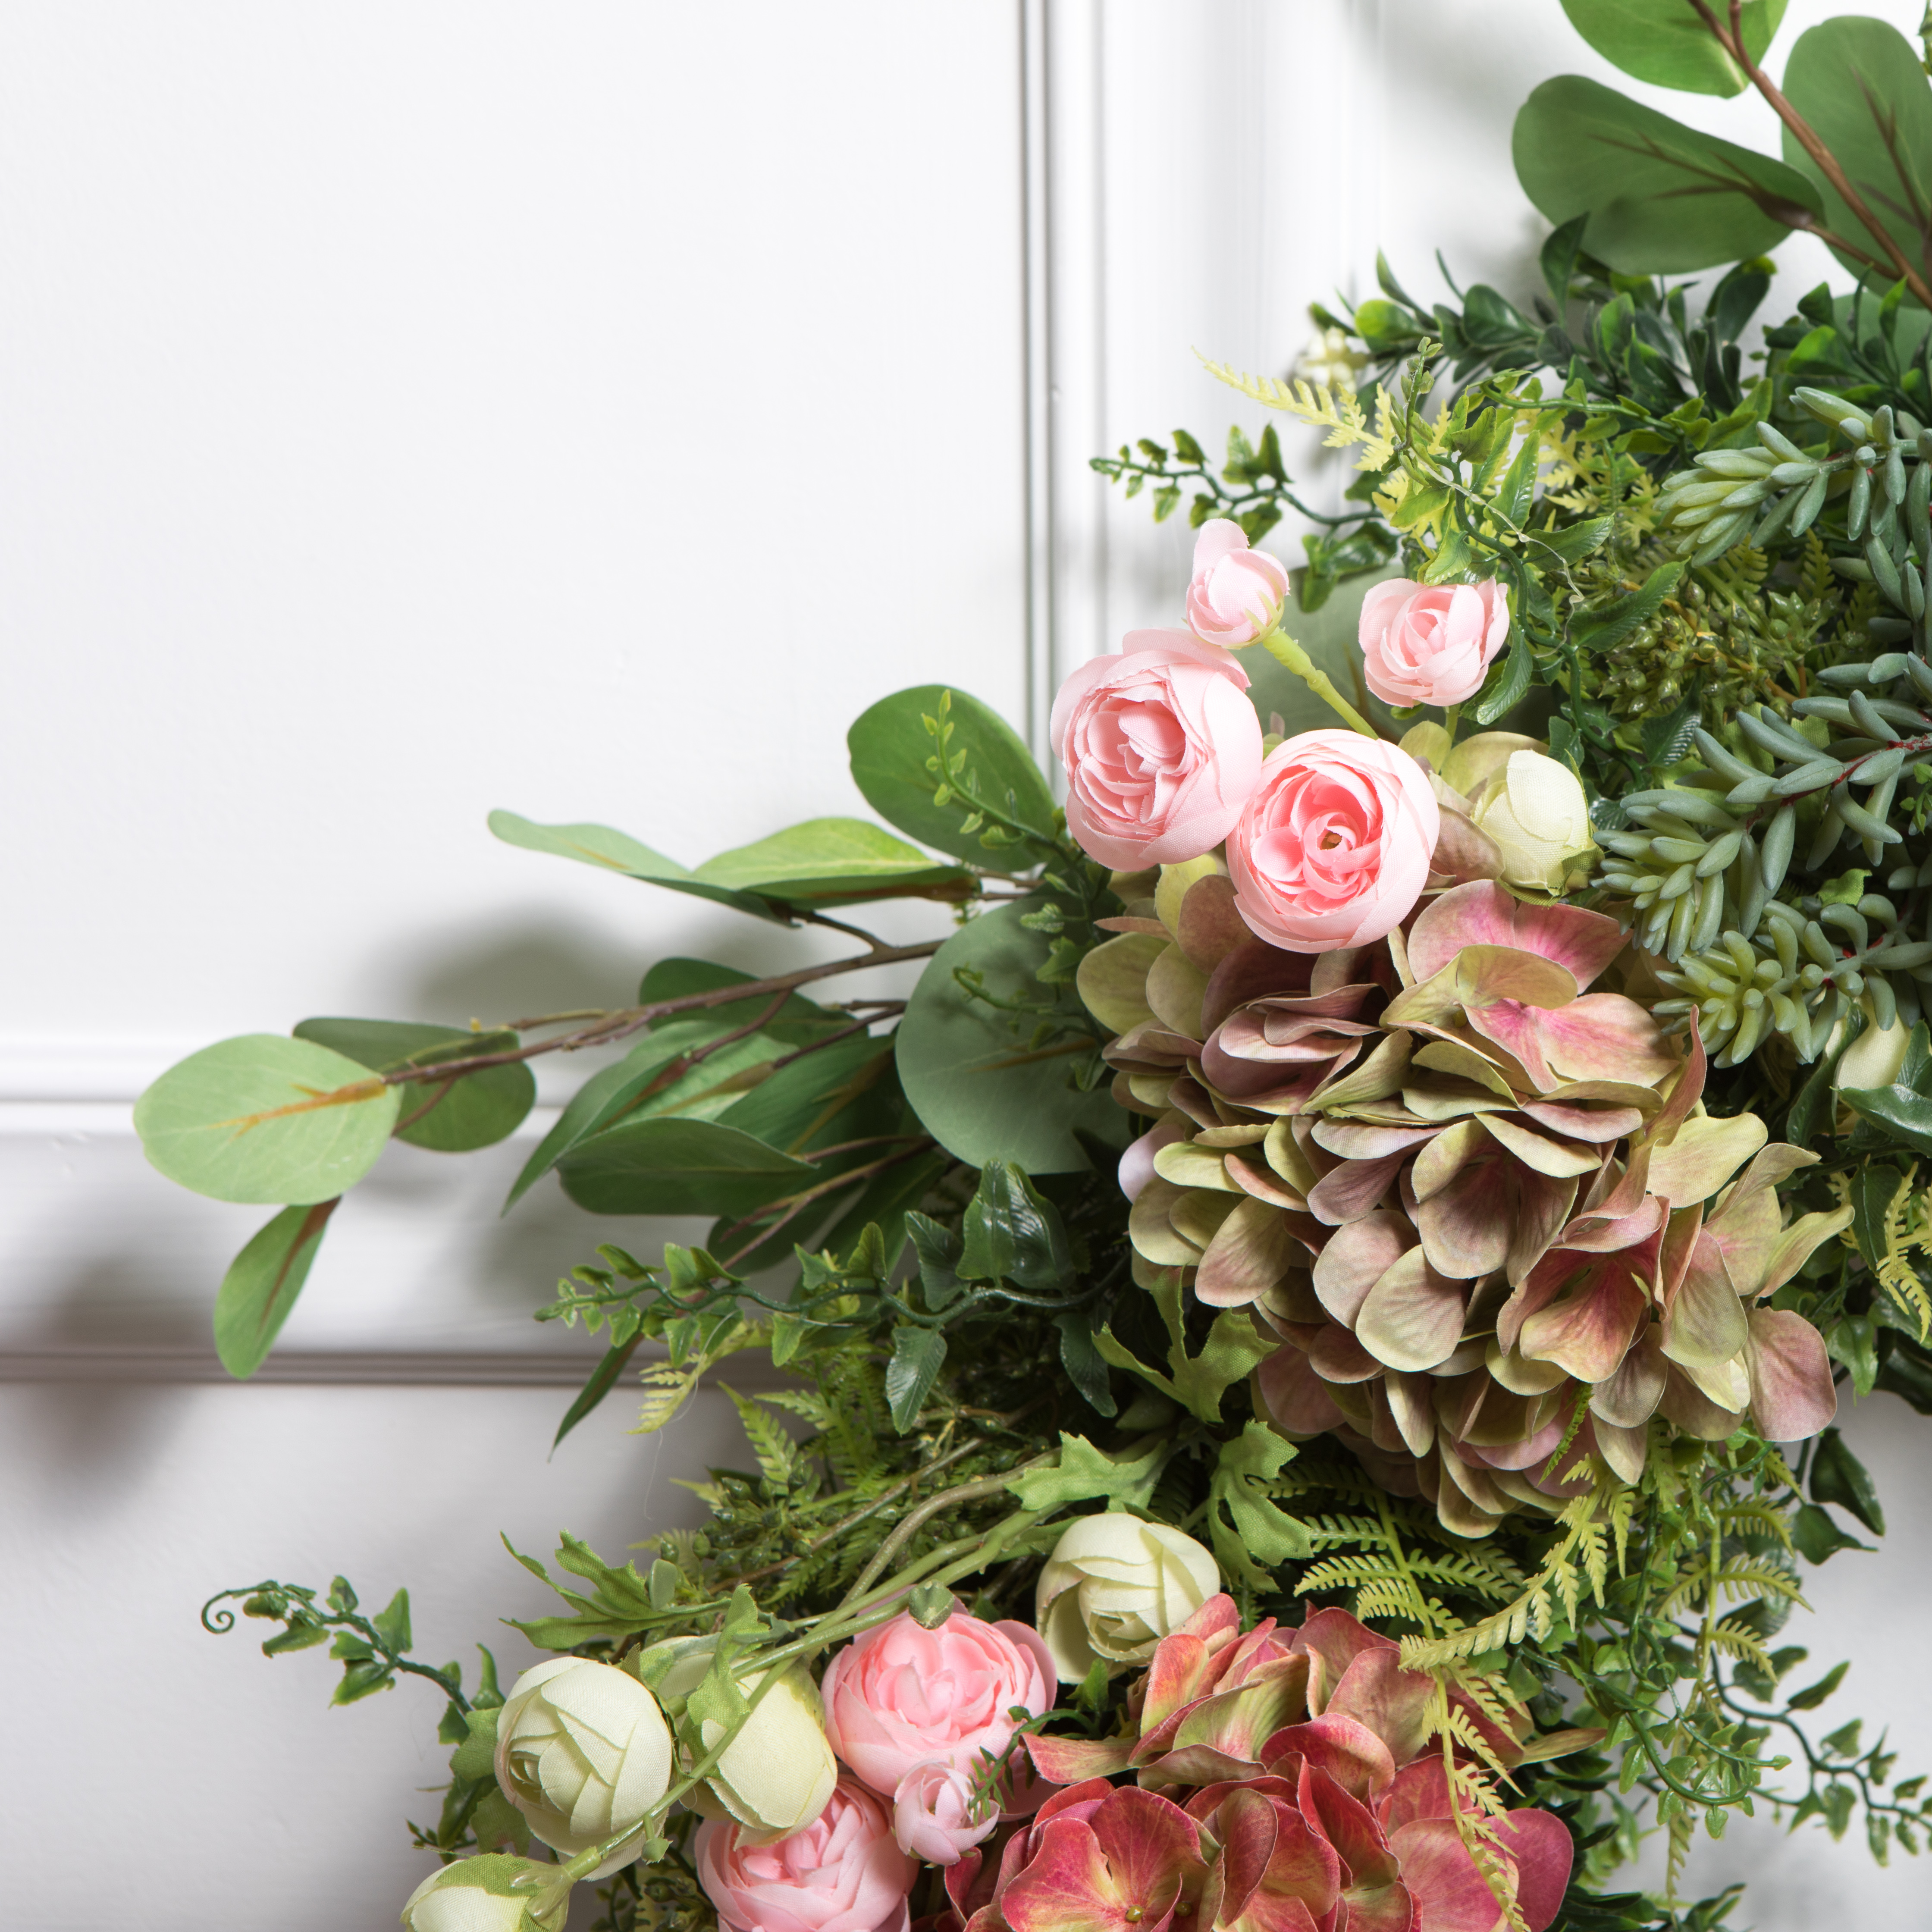 Faux florals and faux greenery arranged into wreath on white door background